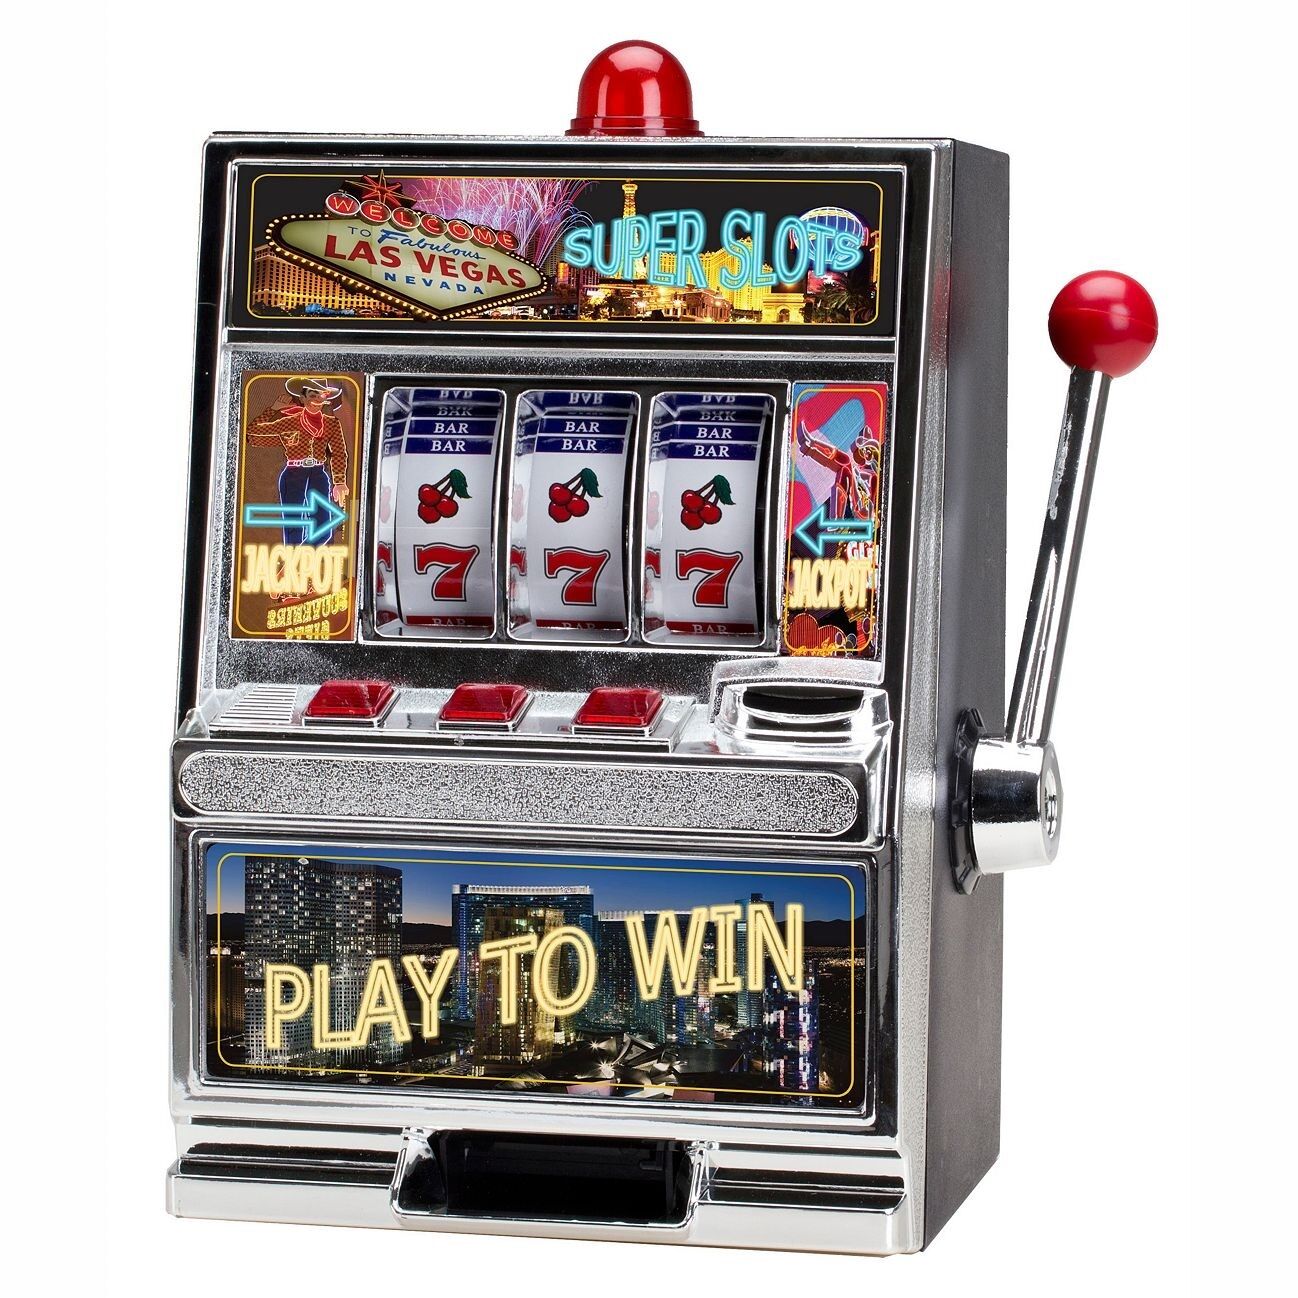 Home Slot Machine Las Vegas Style Casino Coin Bank With Winning Light - image 1 of 1